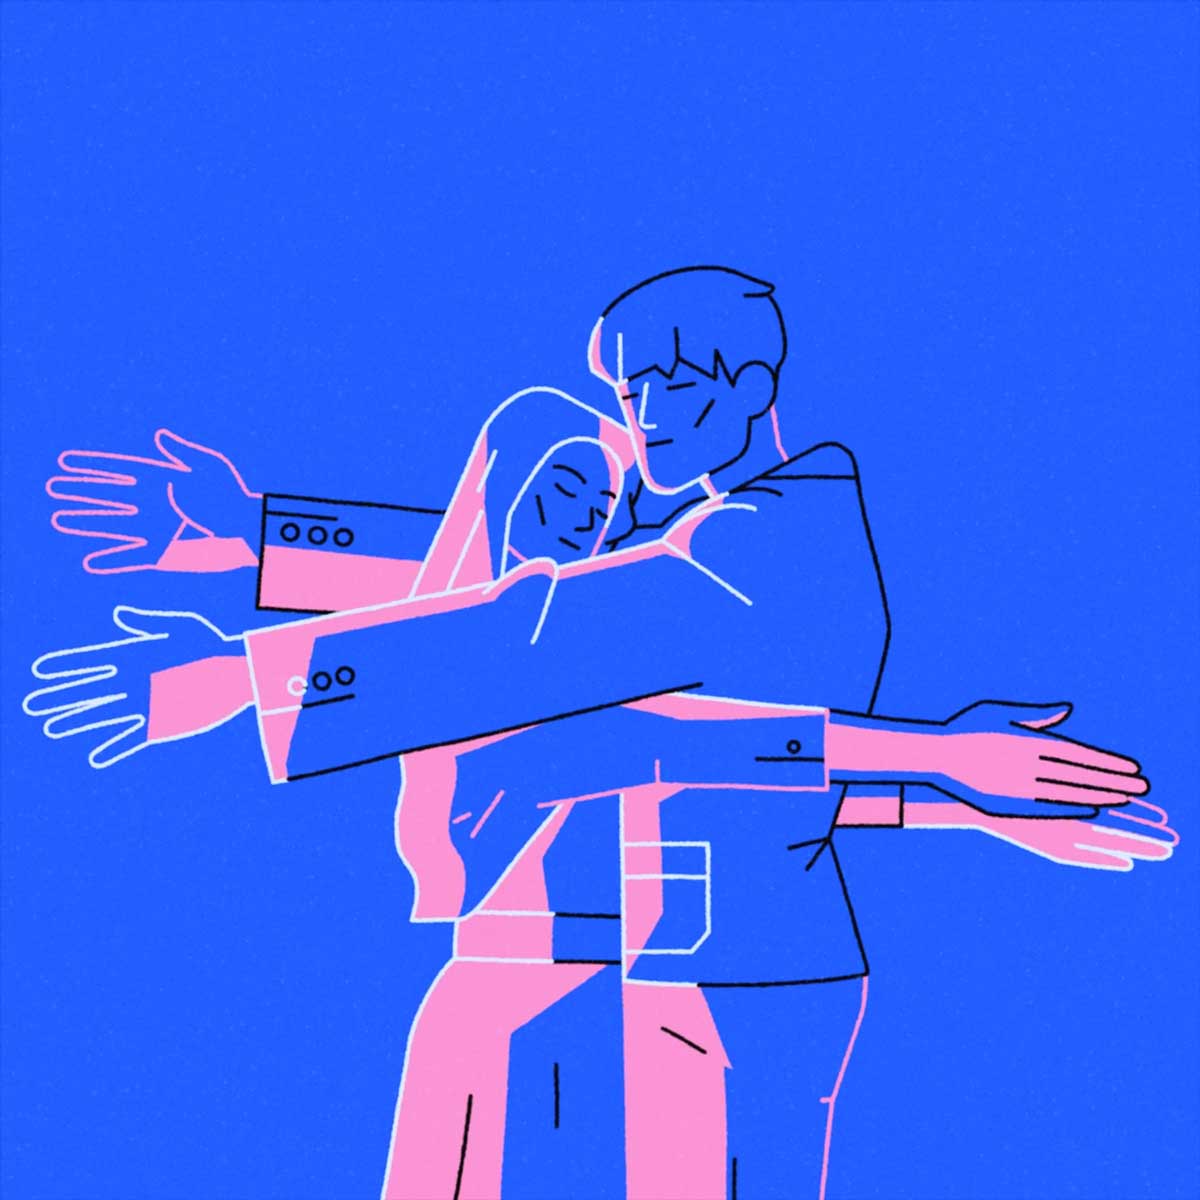 About Love and Balance Short Film Le Cube | STASH MAGAZINE